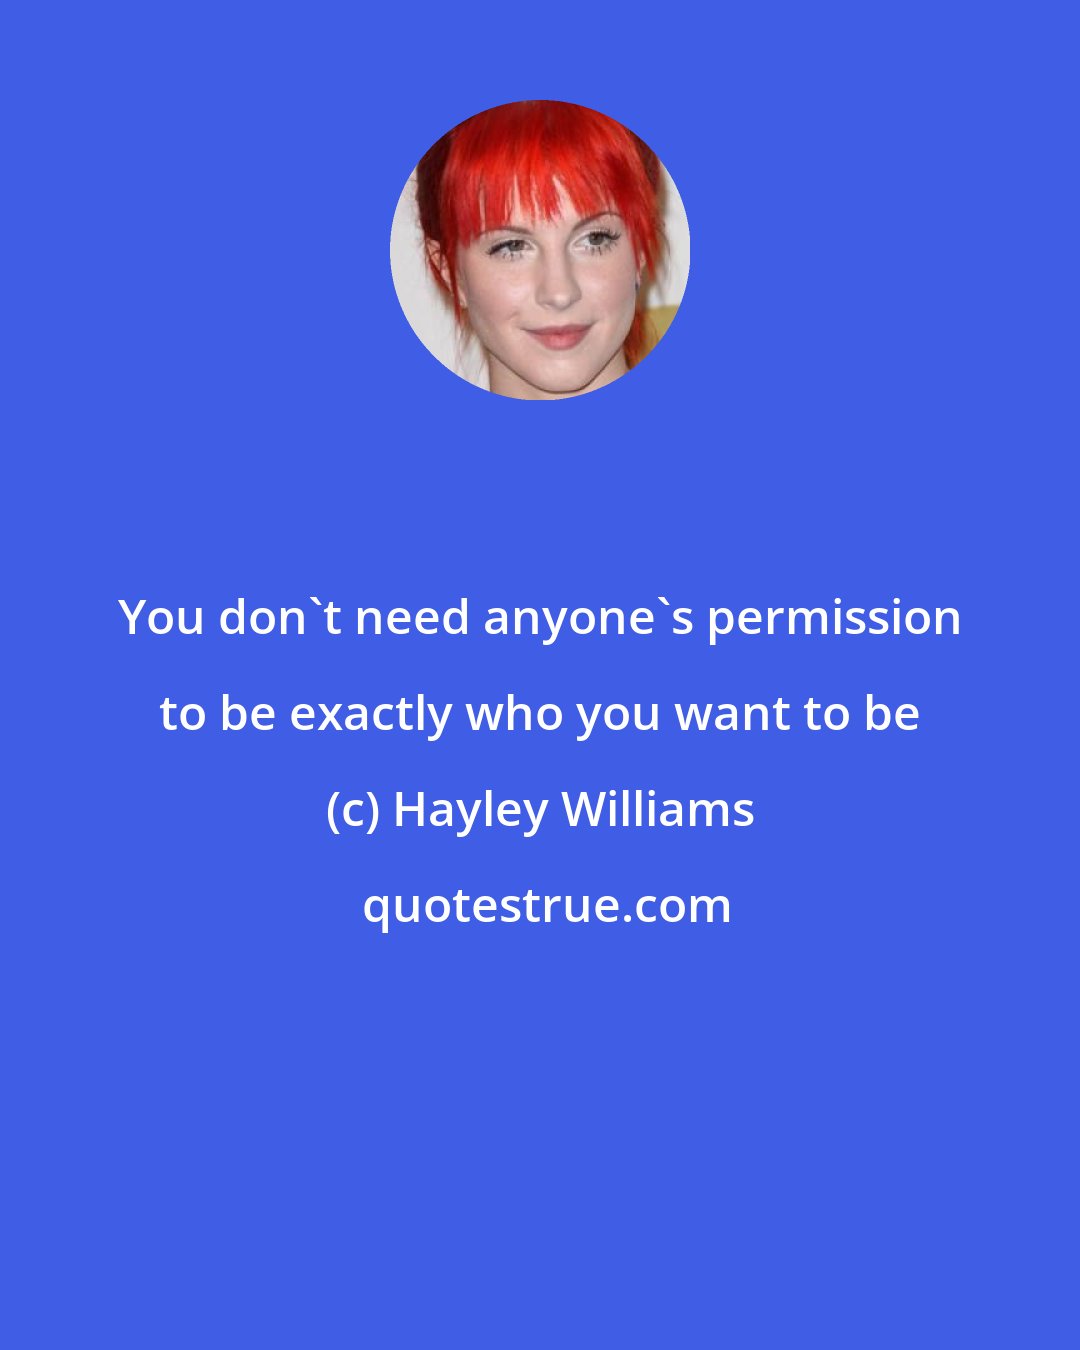 Hayley Williams: You don't need anyone's permission to be exactly who you want to be